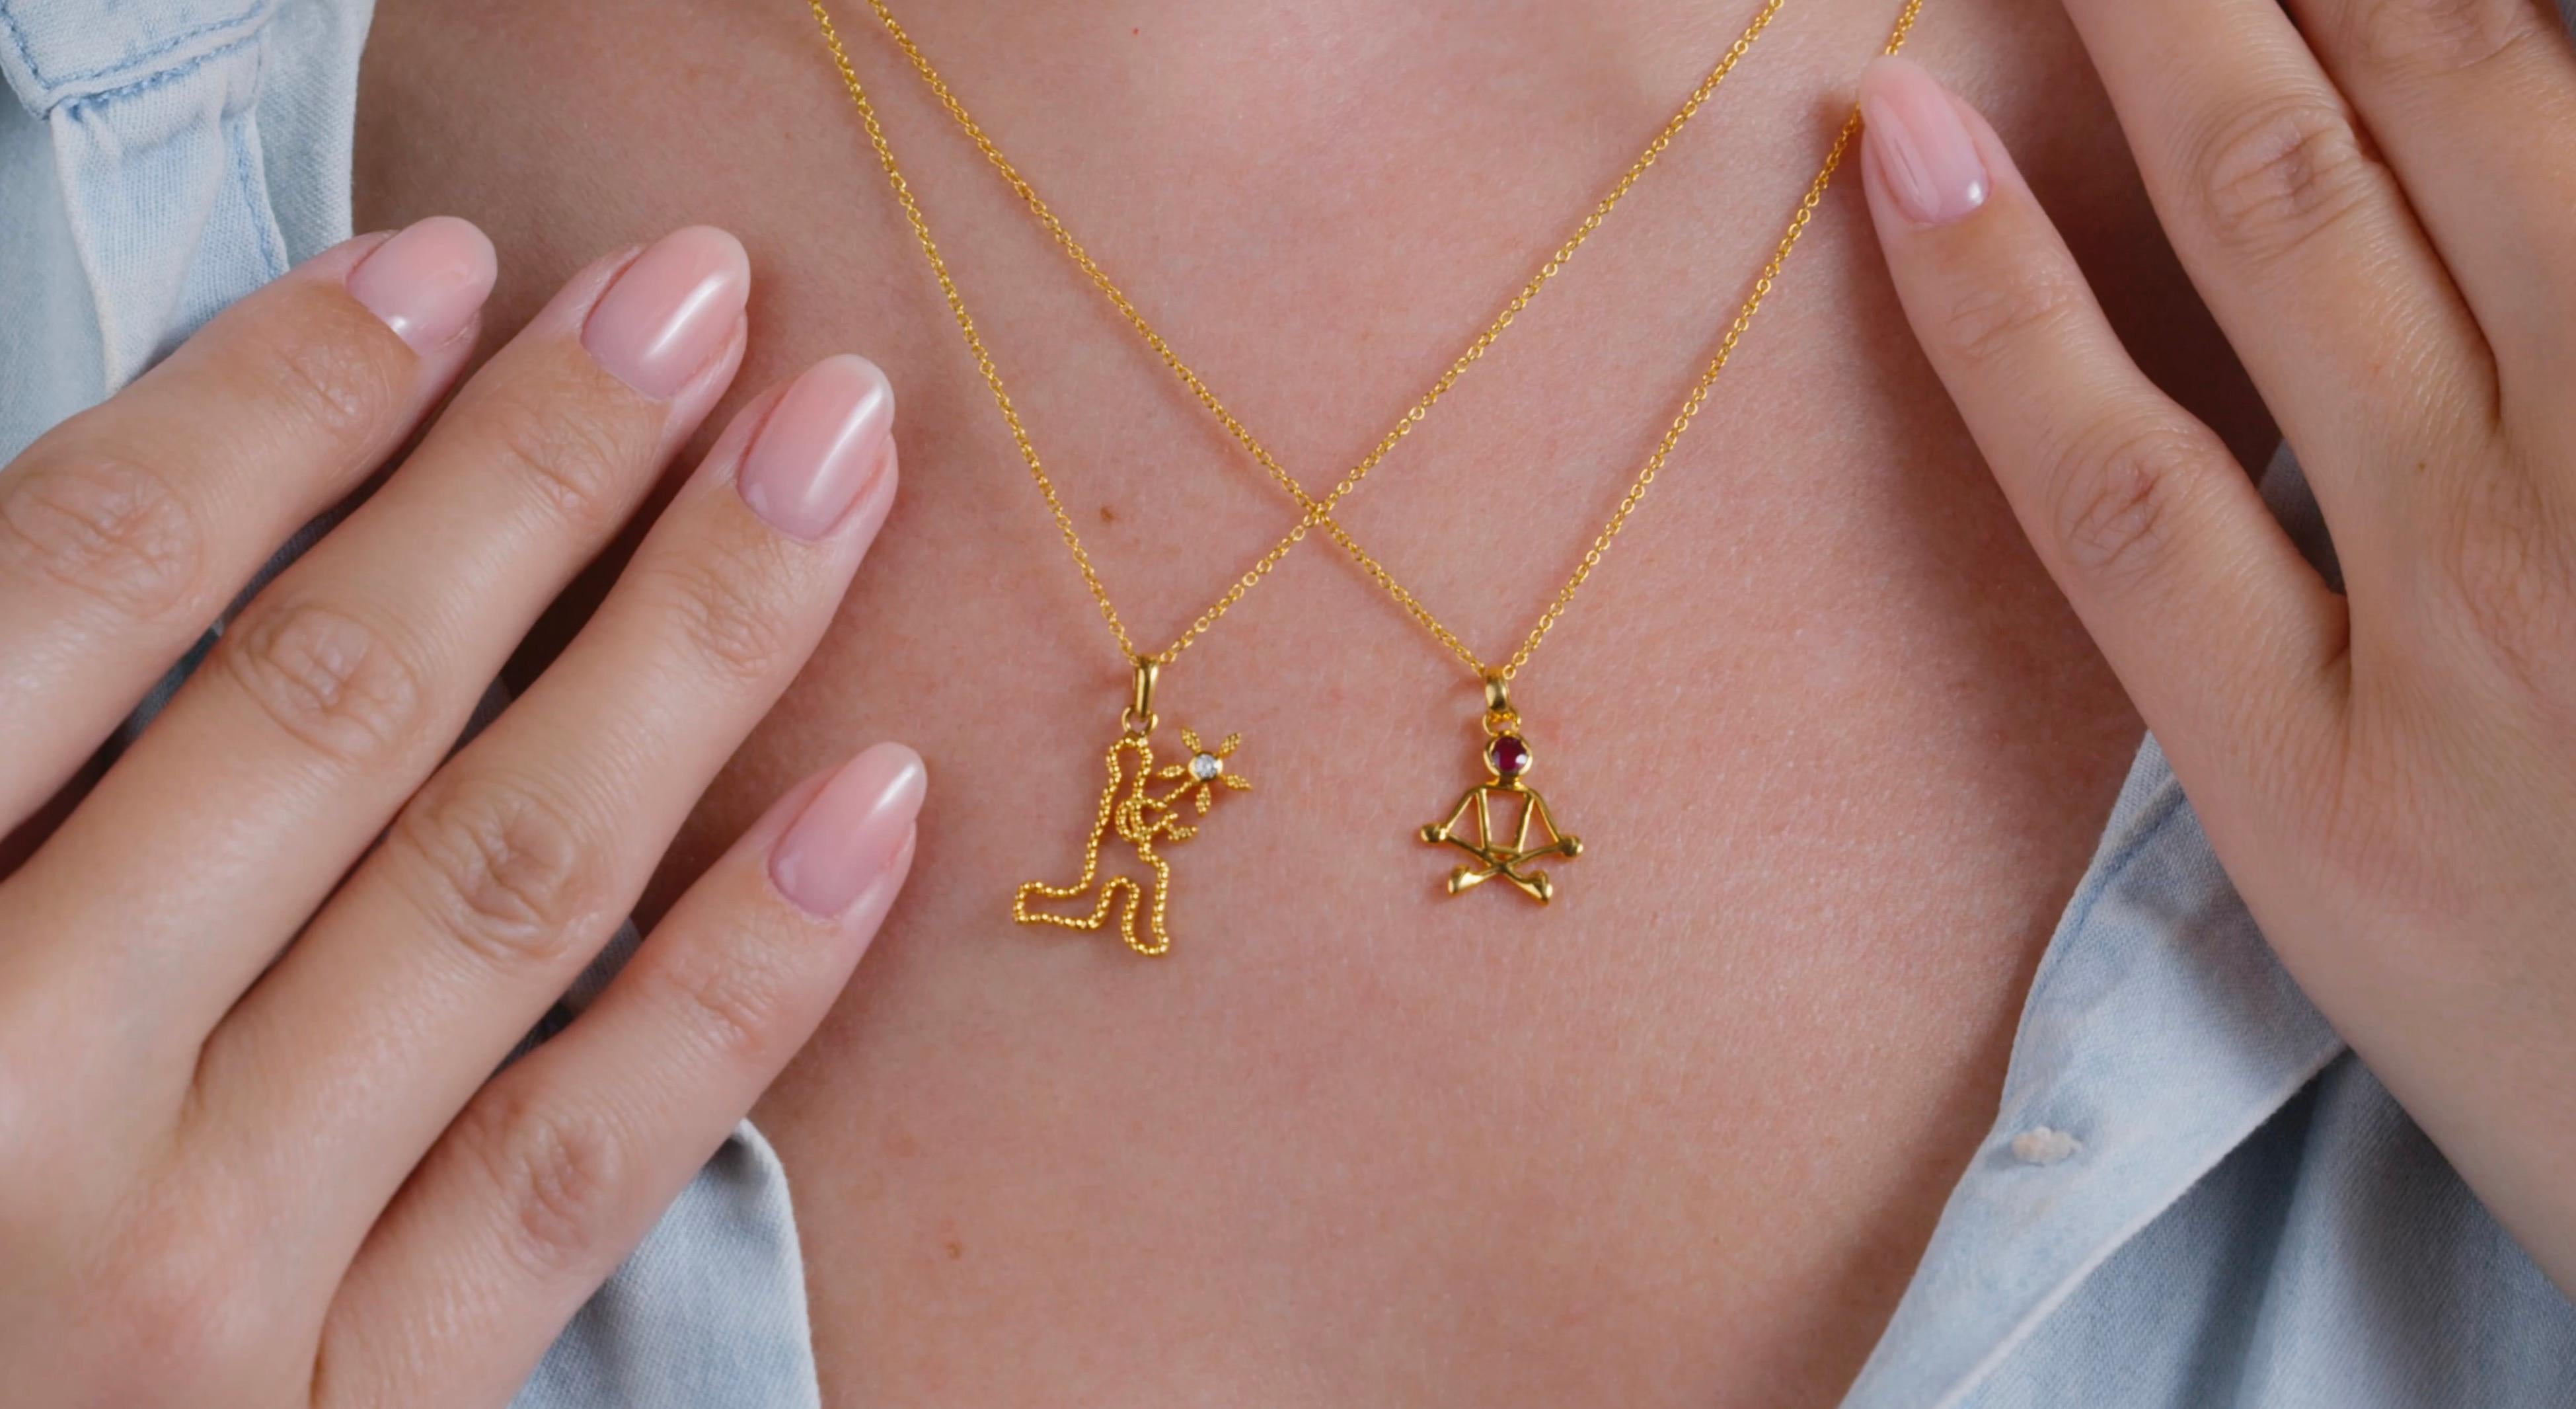 0.10 Carat Ruby 18 Karat Yellow Gold Stick Figure Meditating Necklace.

This pendant necklace was handmade with 18-karat yellow gold. It features a 0.10-carat ruby. This pendant is on an 18-inch chain necklace with a lobster clasp. The pendant